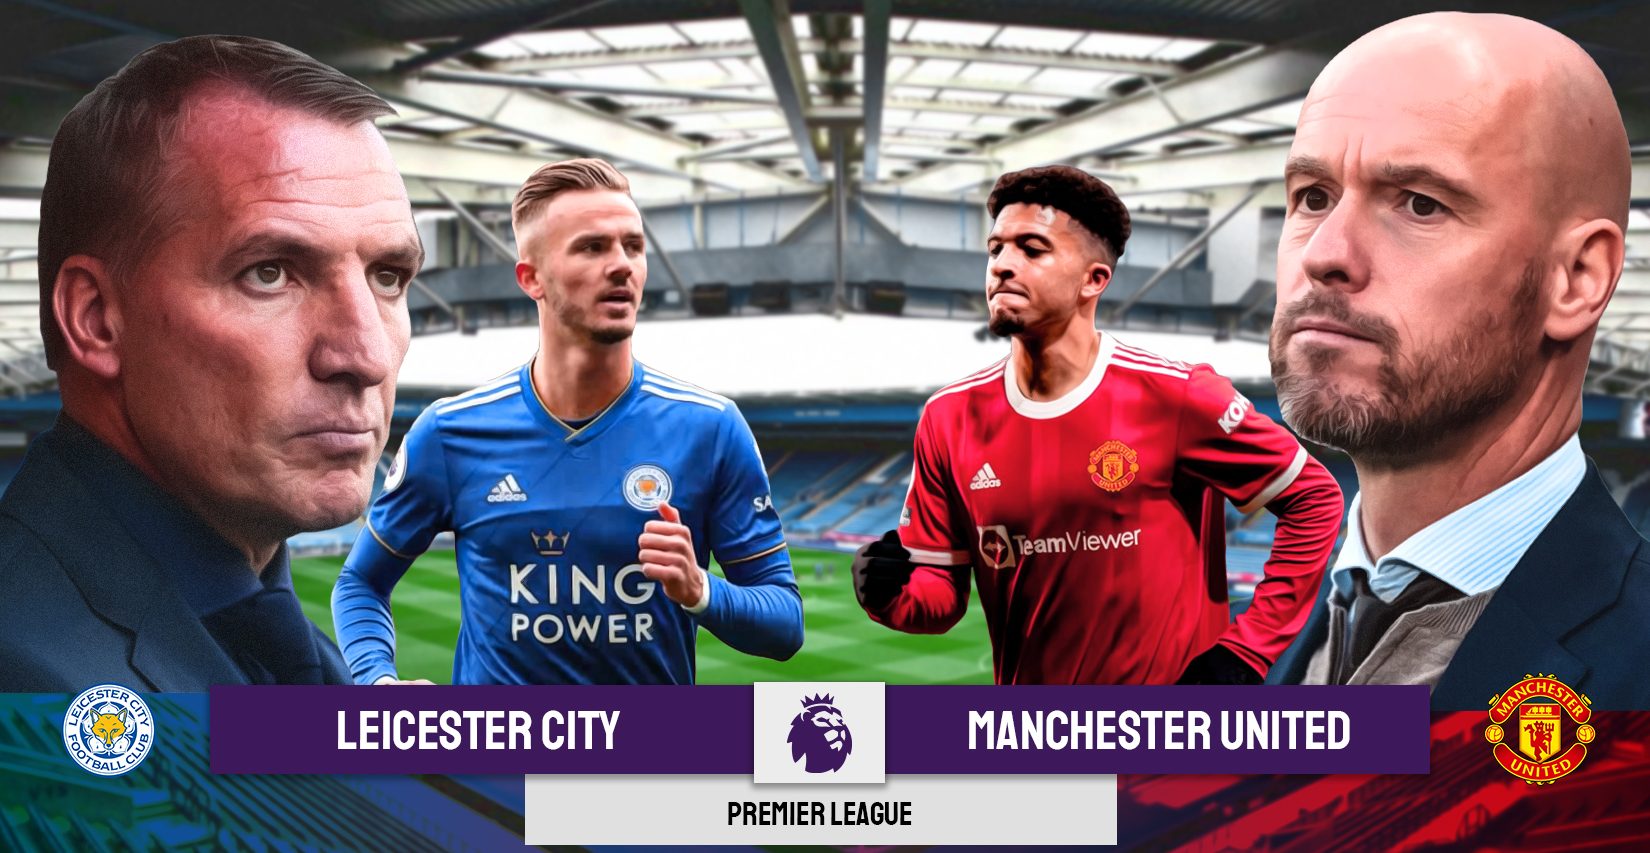 Leicester City vs Manchester United Premier League Match Day 5